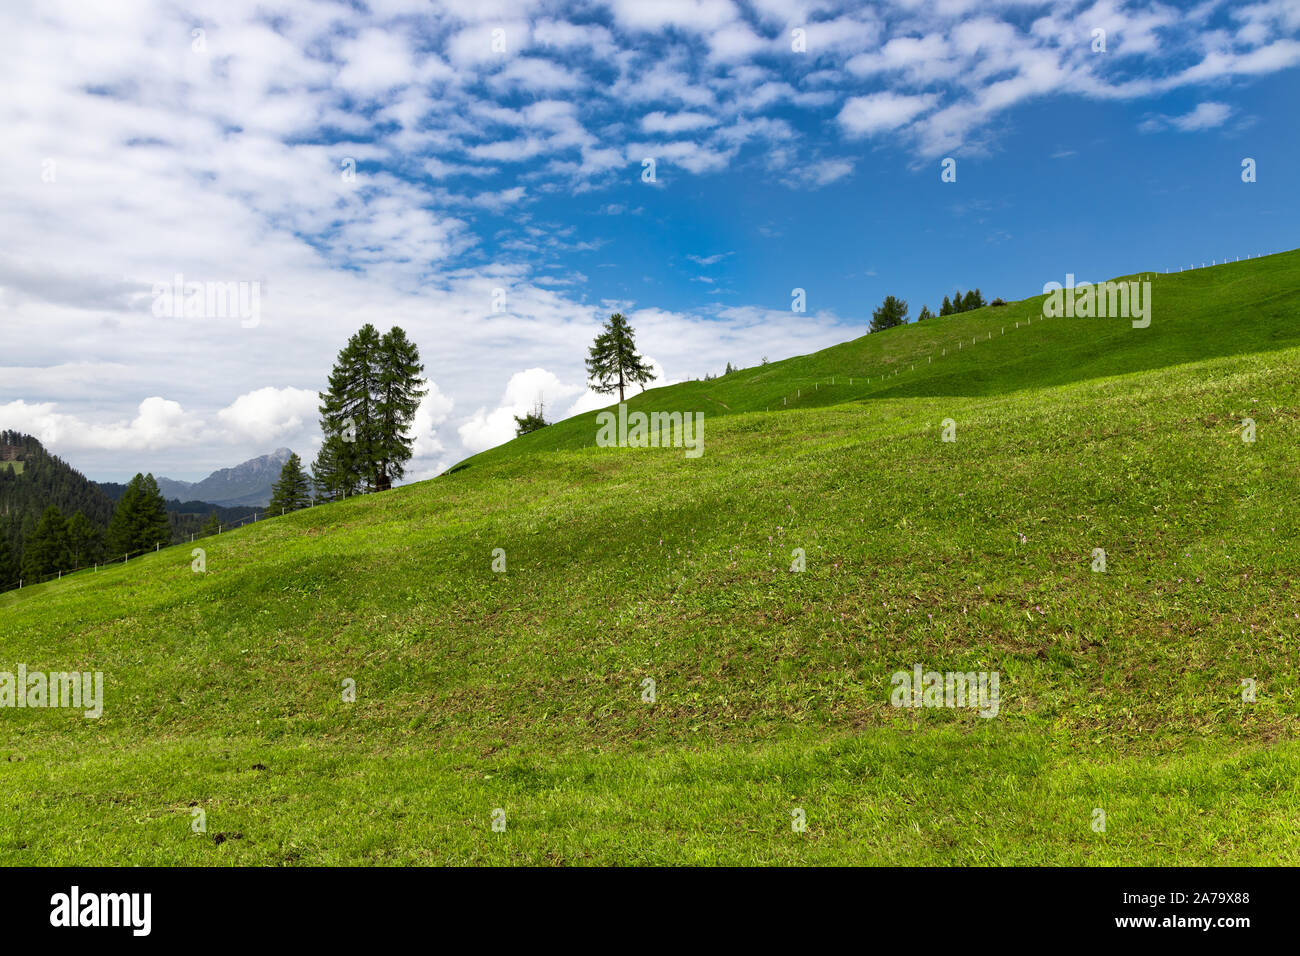 Italy / South Tyrol / Alto Adige: steep green alp and a blue sky on the way from wengen to fanes / sennes alp Stock Photo